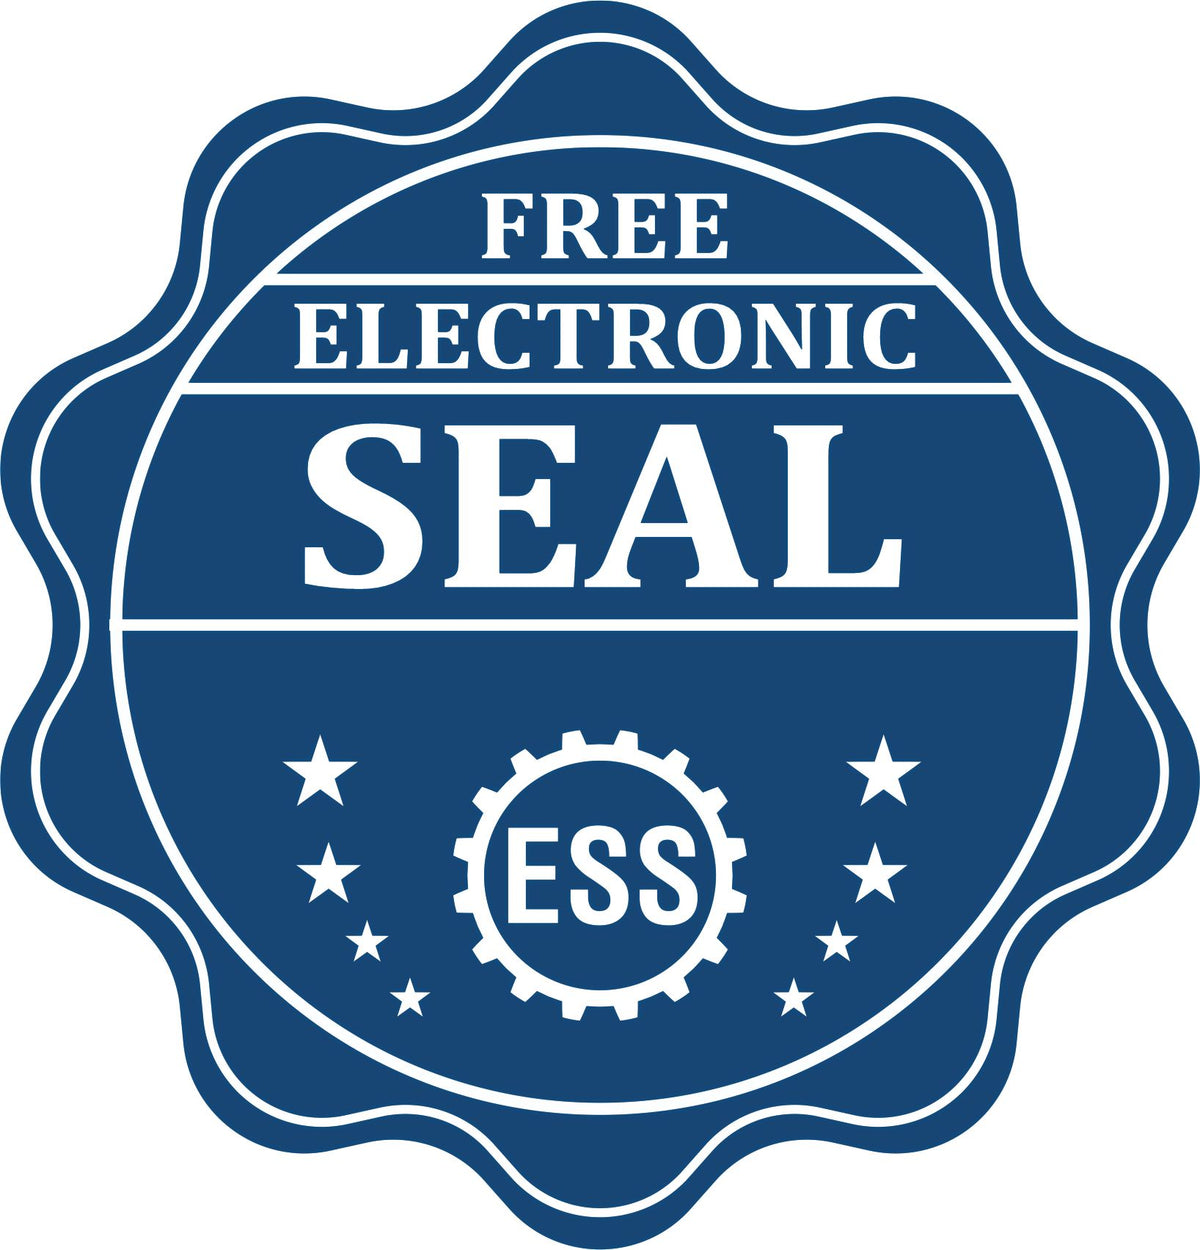 A badge showing a free electronic seal for the MaxLight Premium Pre-Inked Louisiana State Seal Notarial Stamp with stars and the ESS gear on the emblem.